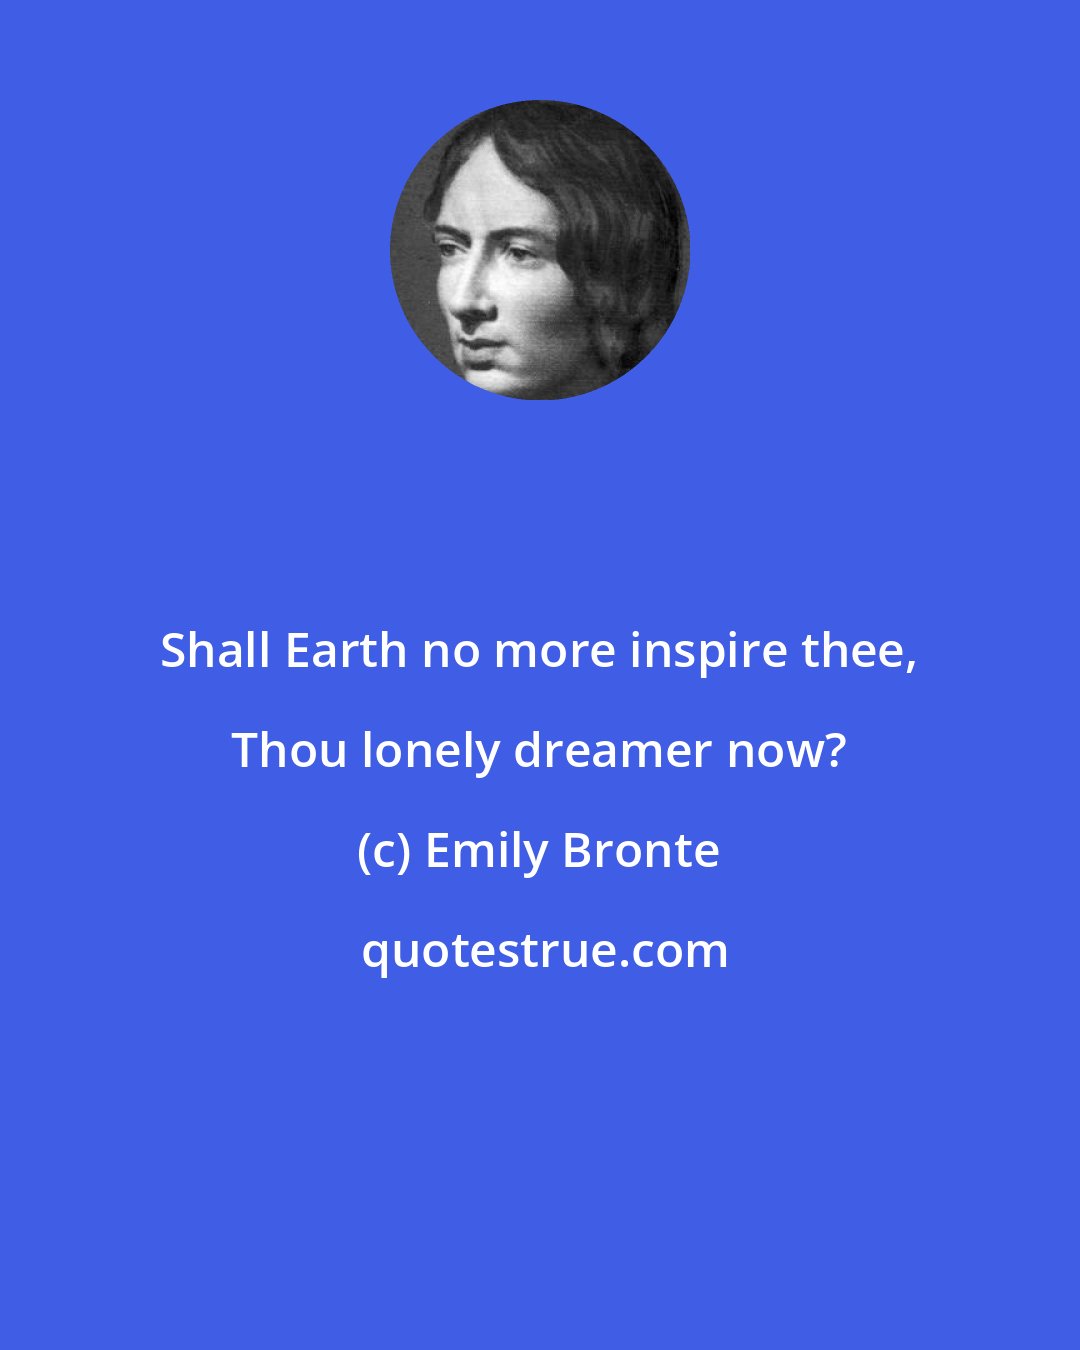 Emily Bronte: Shall Earth no more inspire thee, Thou lonely dreamer now?